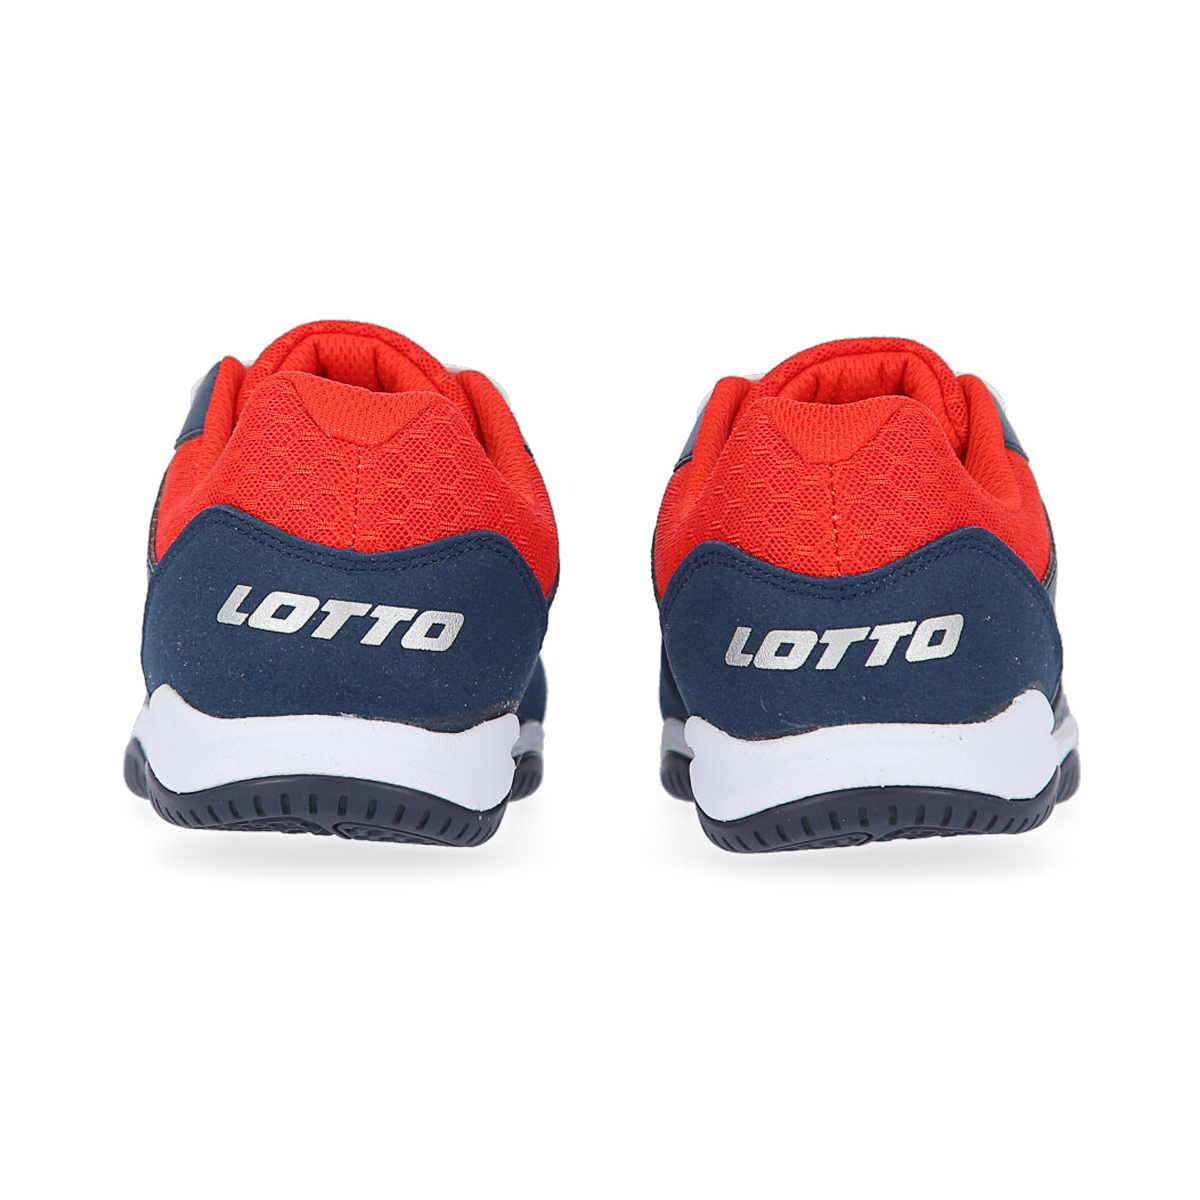 Botines Lotto Tacto 300 IV,  image number null